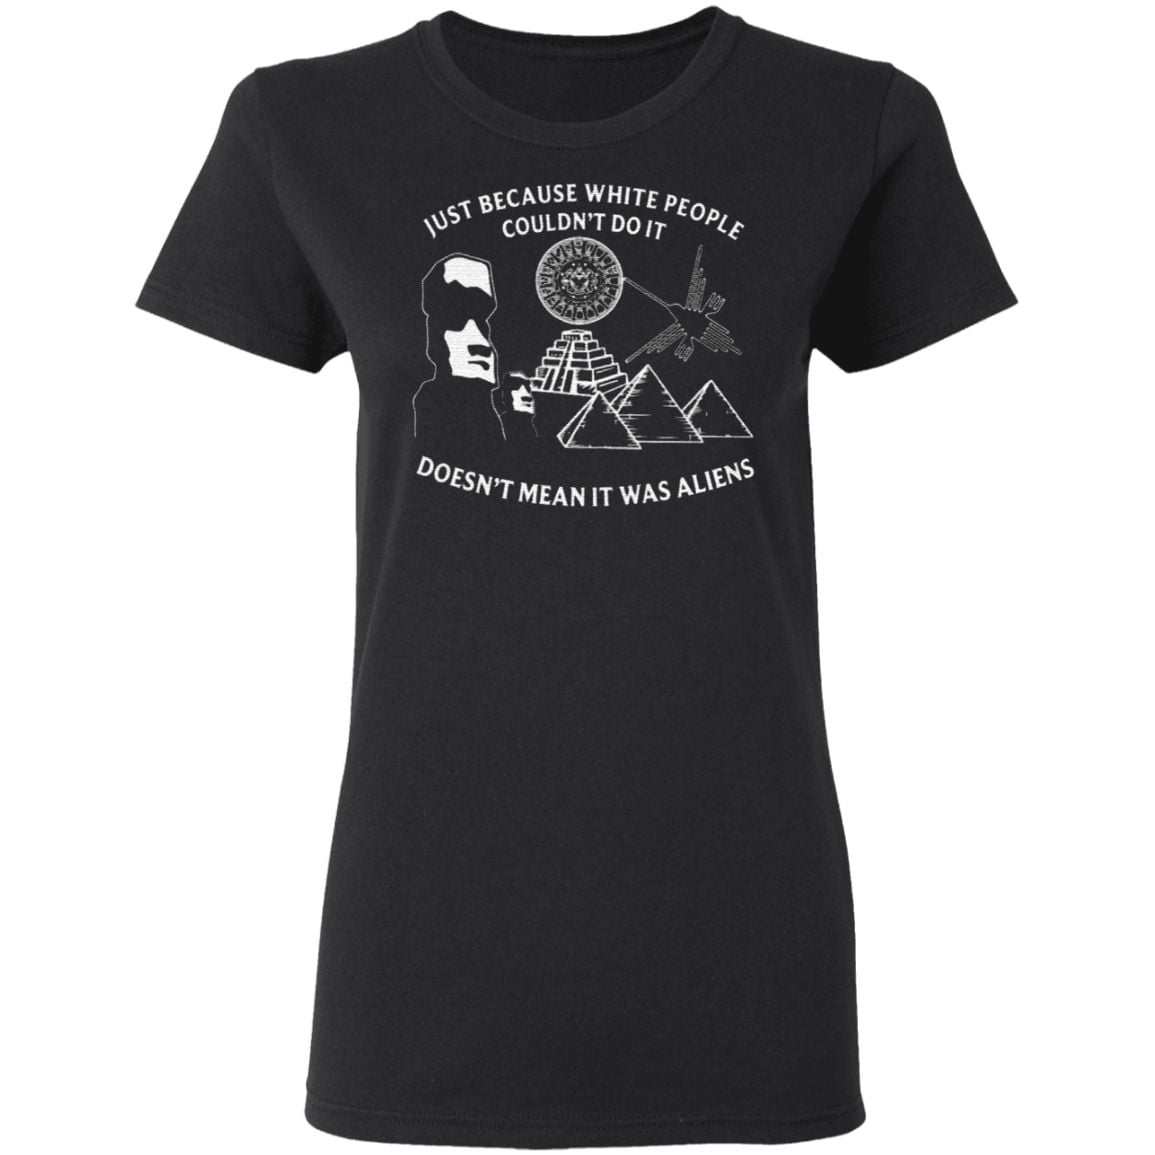 Just Because White People Couldn’t Do It Doesn’t Mean It Was Aliens T Shirt